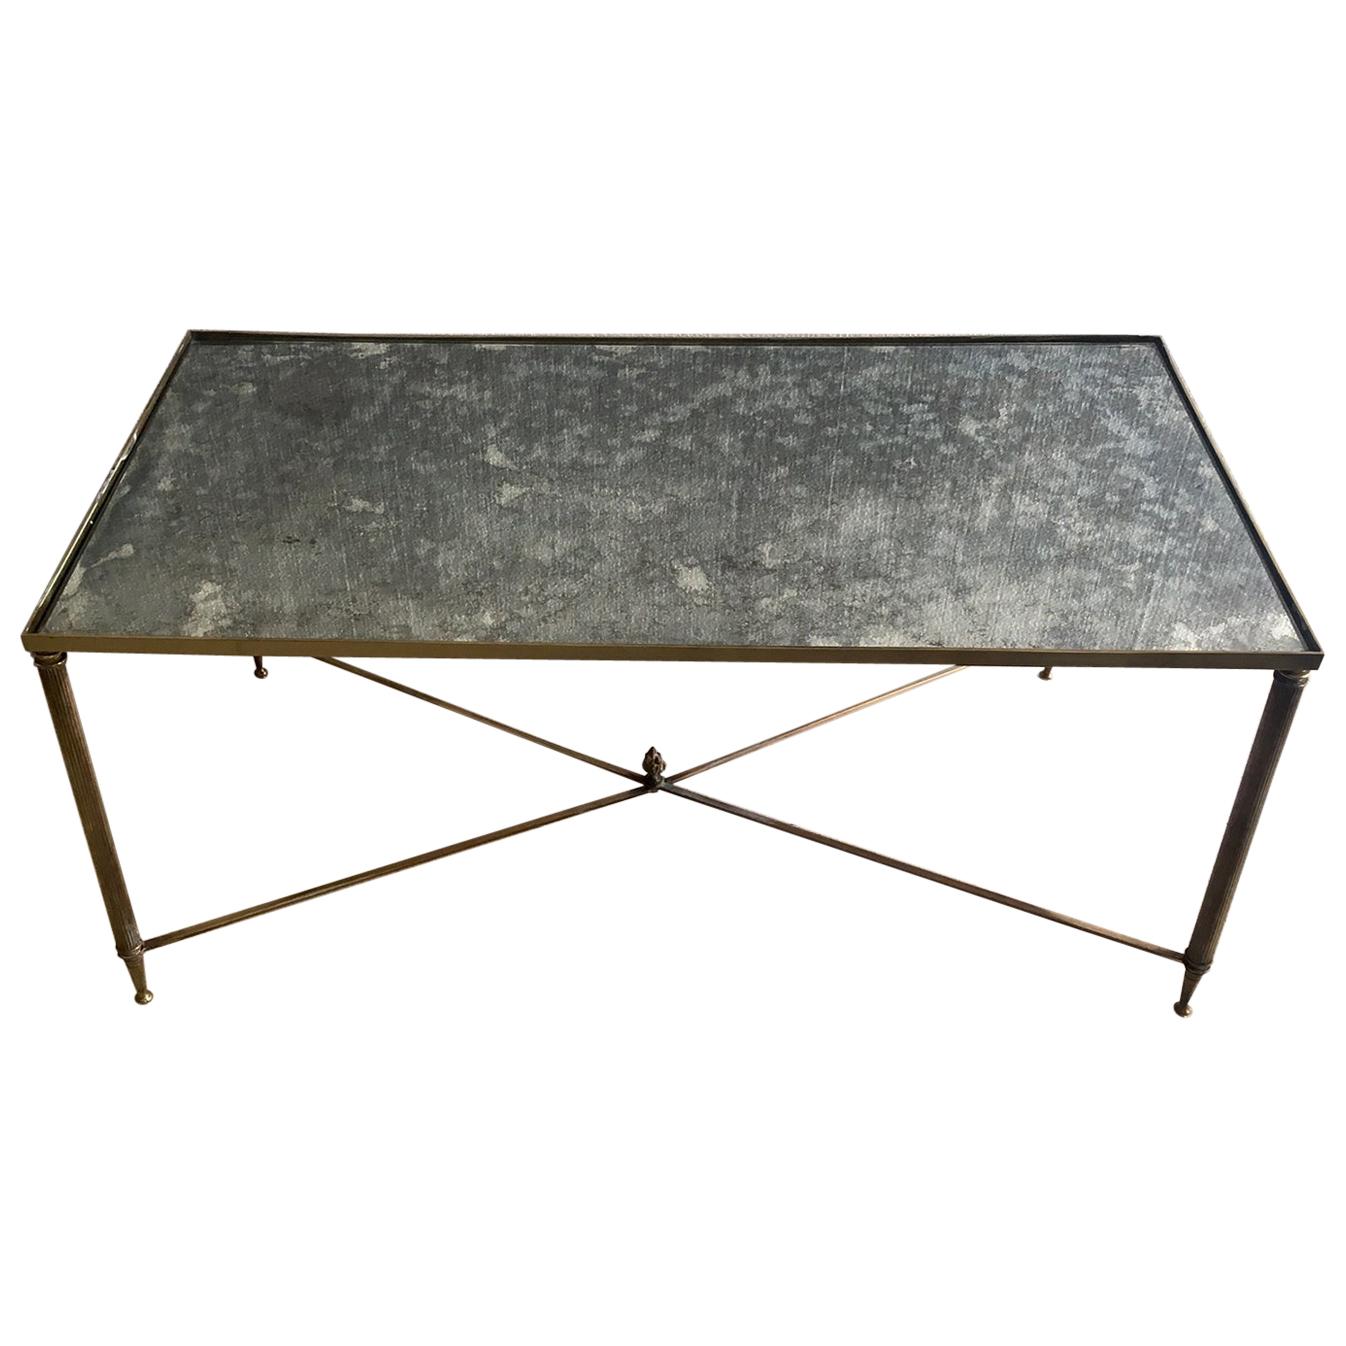 Midcentury Neocalssical Brass Coffee Table Jansen Style